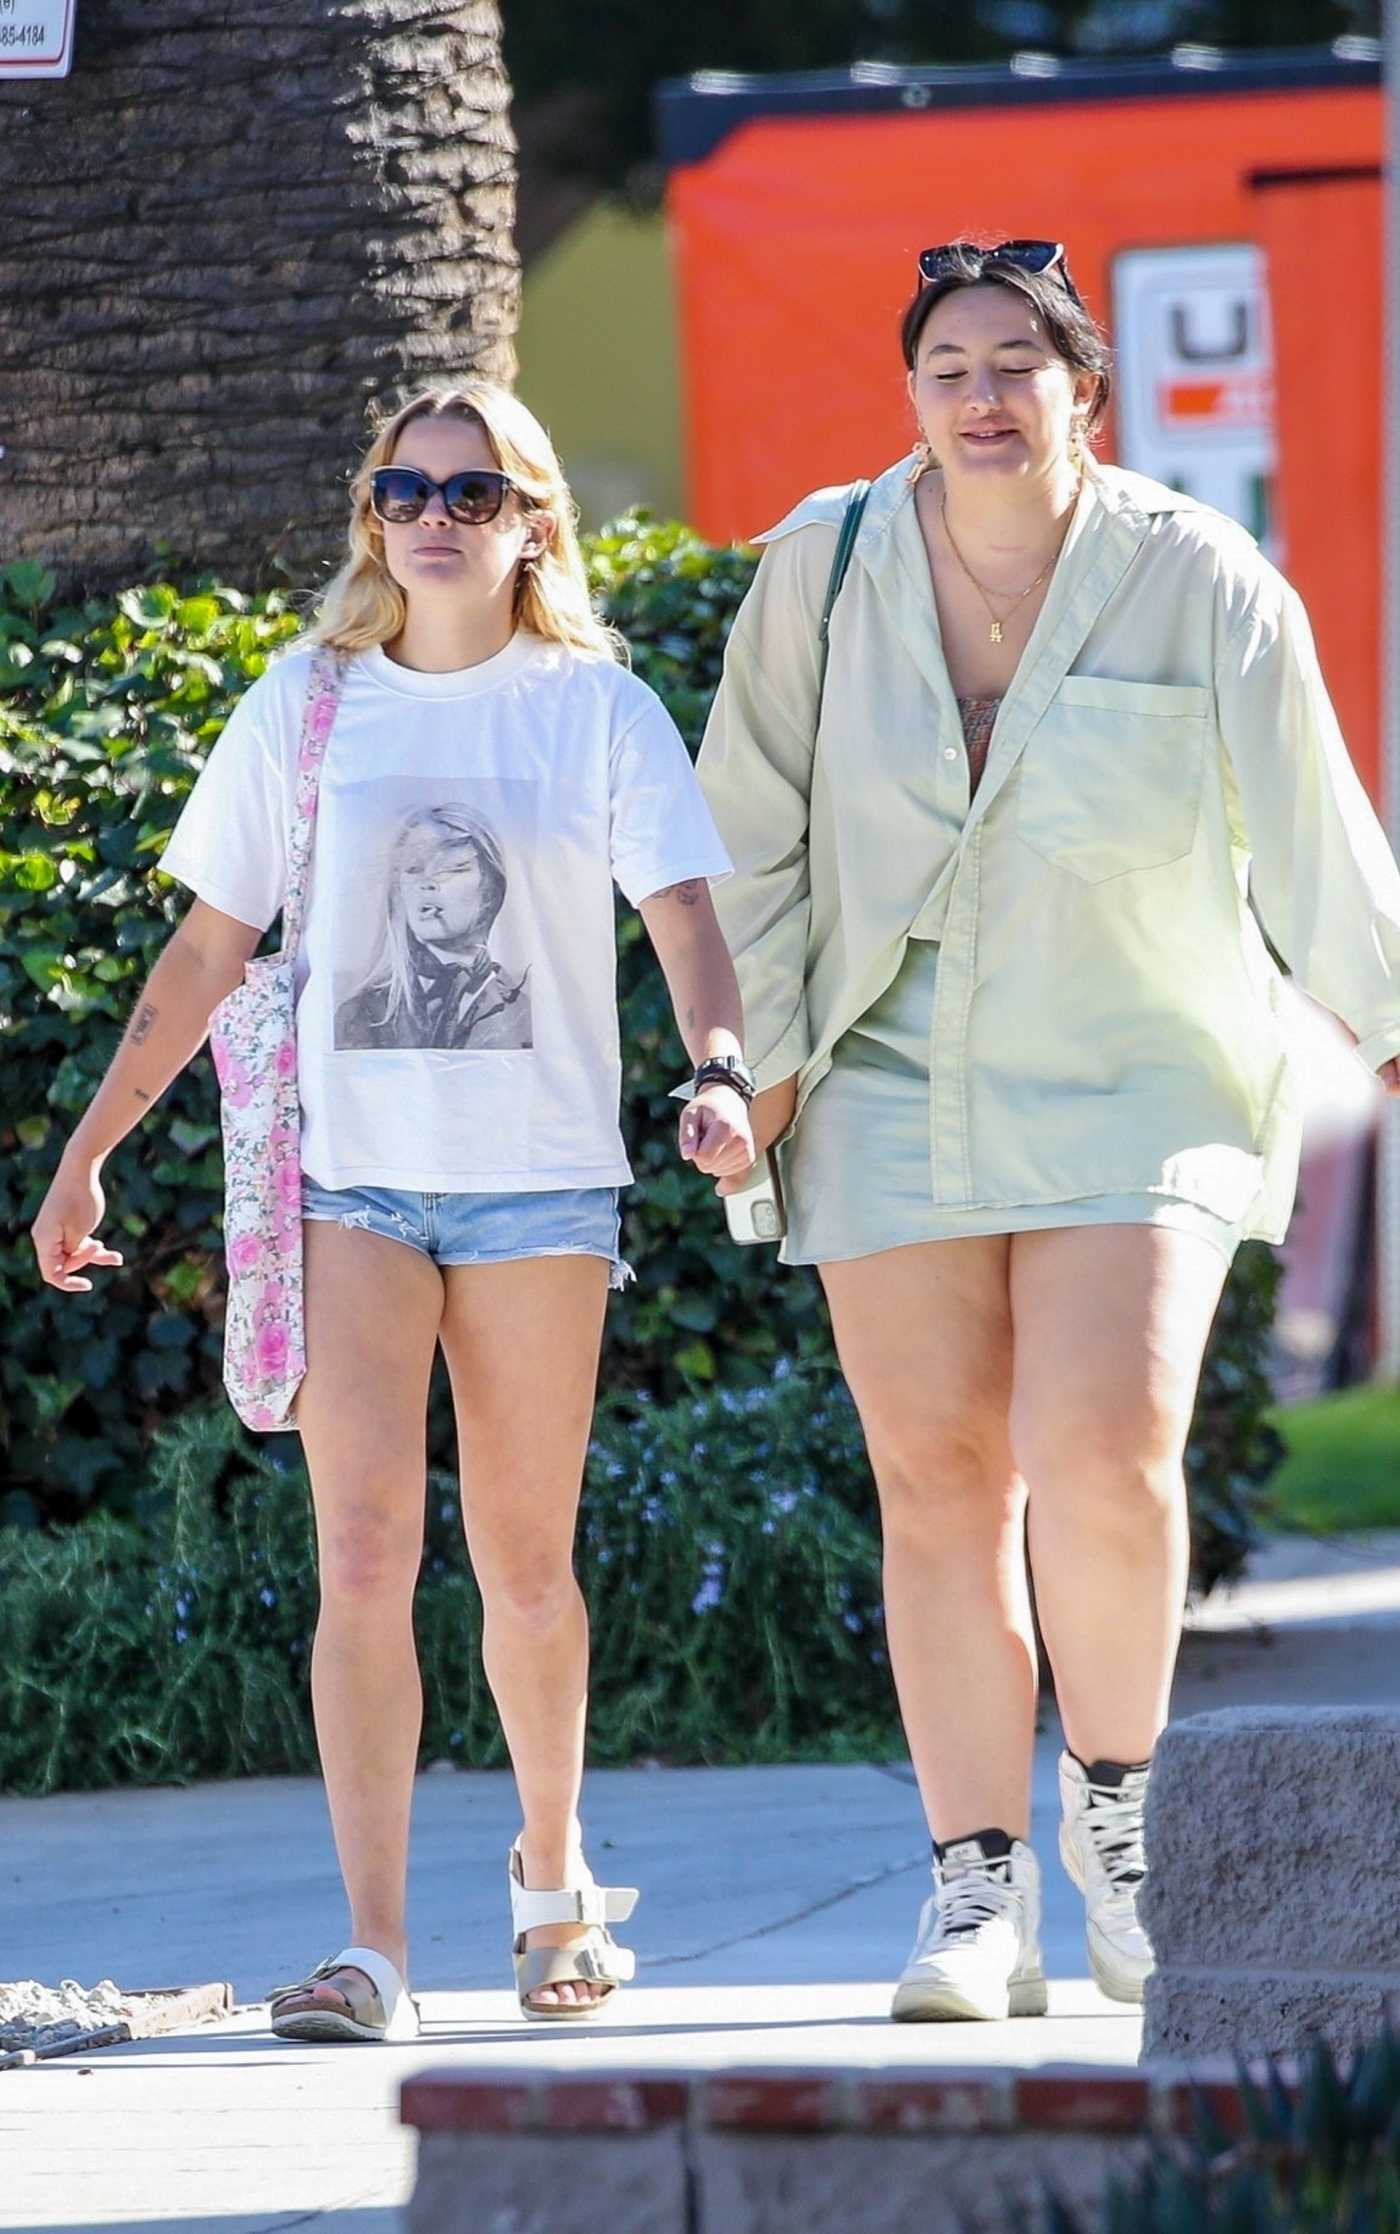 Ava Phillippe in a White Tee Goes to Lunch with Her Friend at Coral Tree Cafe in Brentwood 06/17/2022